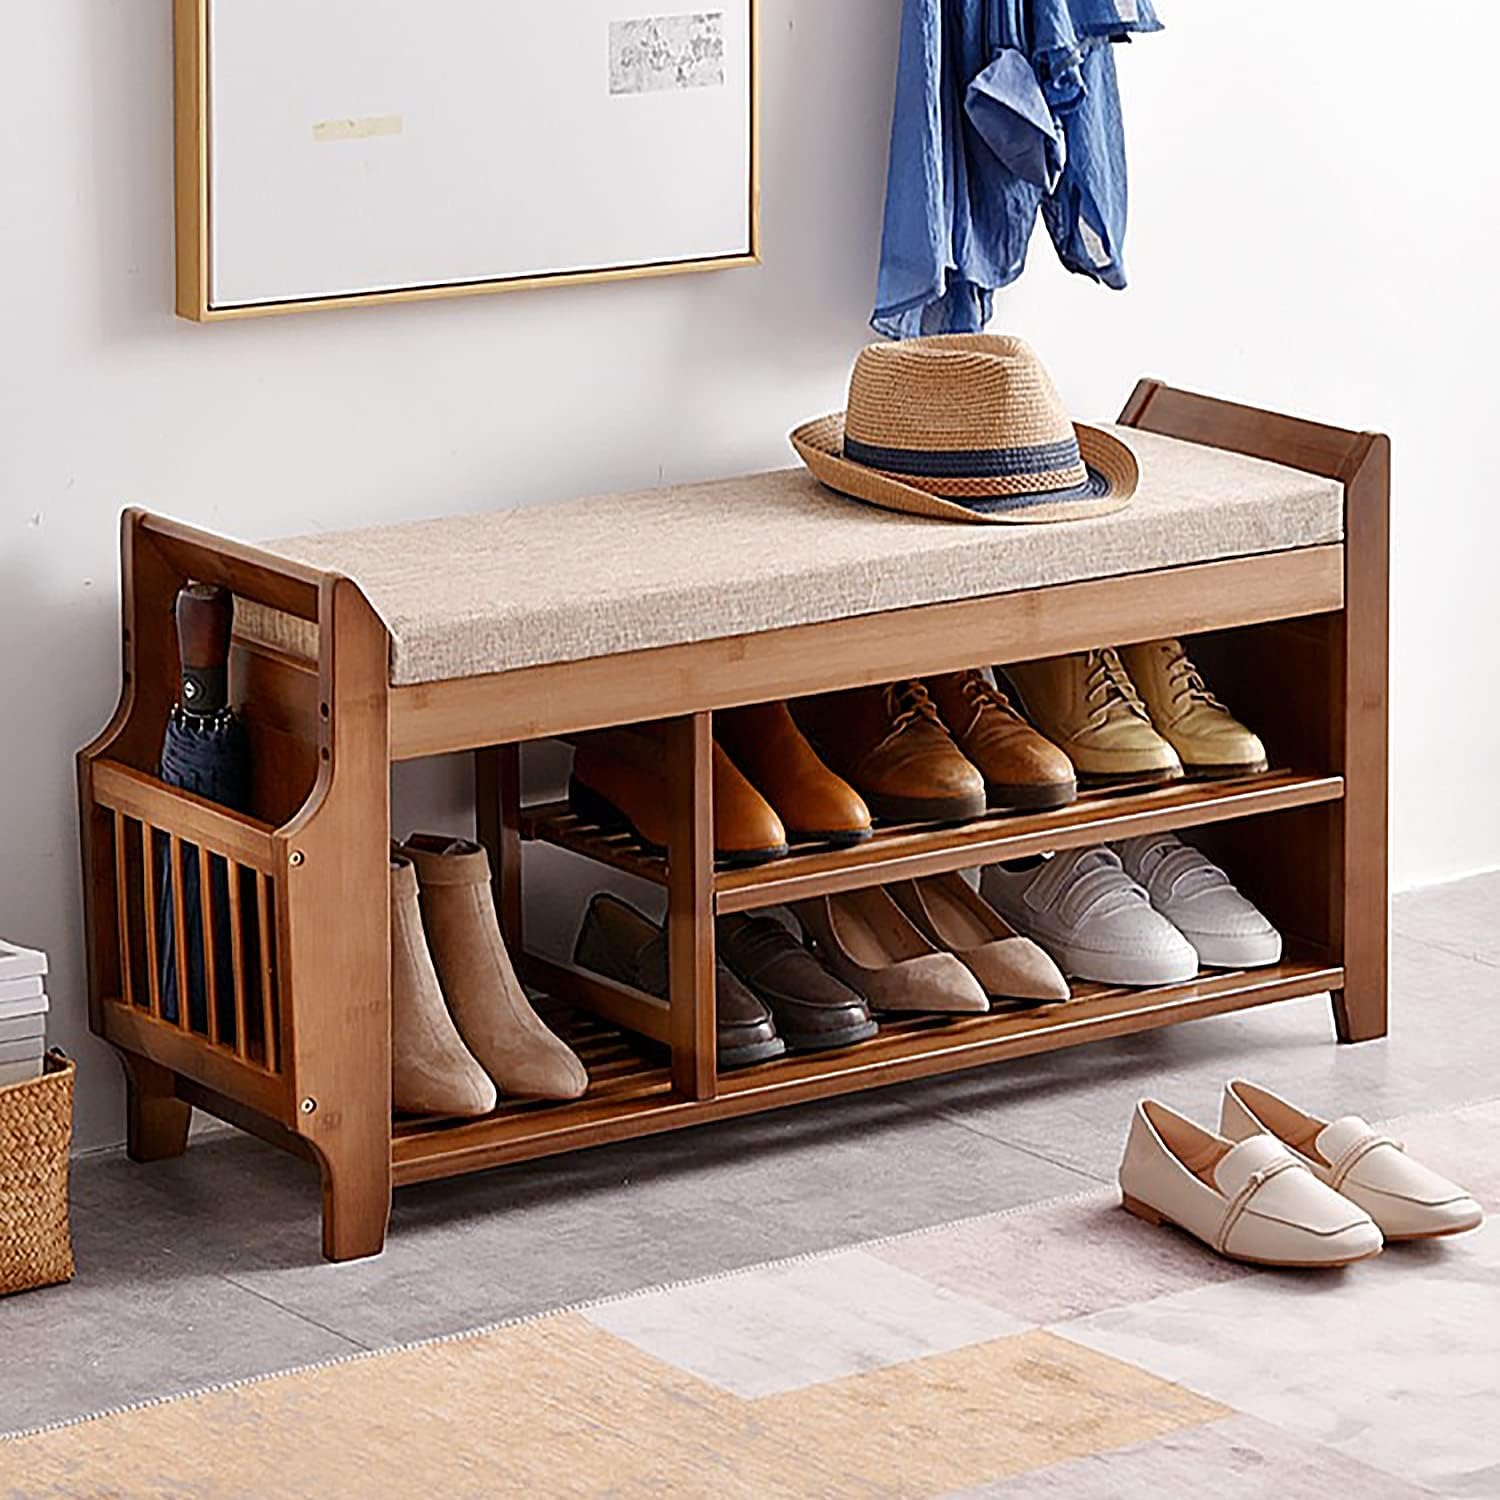 https://bigbigmart.com/wp-content/uploads/2023/08/PETKABOO-2-Tier-Shoe-Bench-Shoe-Rack-with-Hidden-Drawer-and-Side-Holder-Shoe-Storage-Bench-Organizer-for-Entryway-Hallway-Living-Room-Bamboo-Material-2.jpg